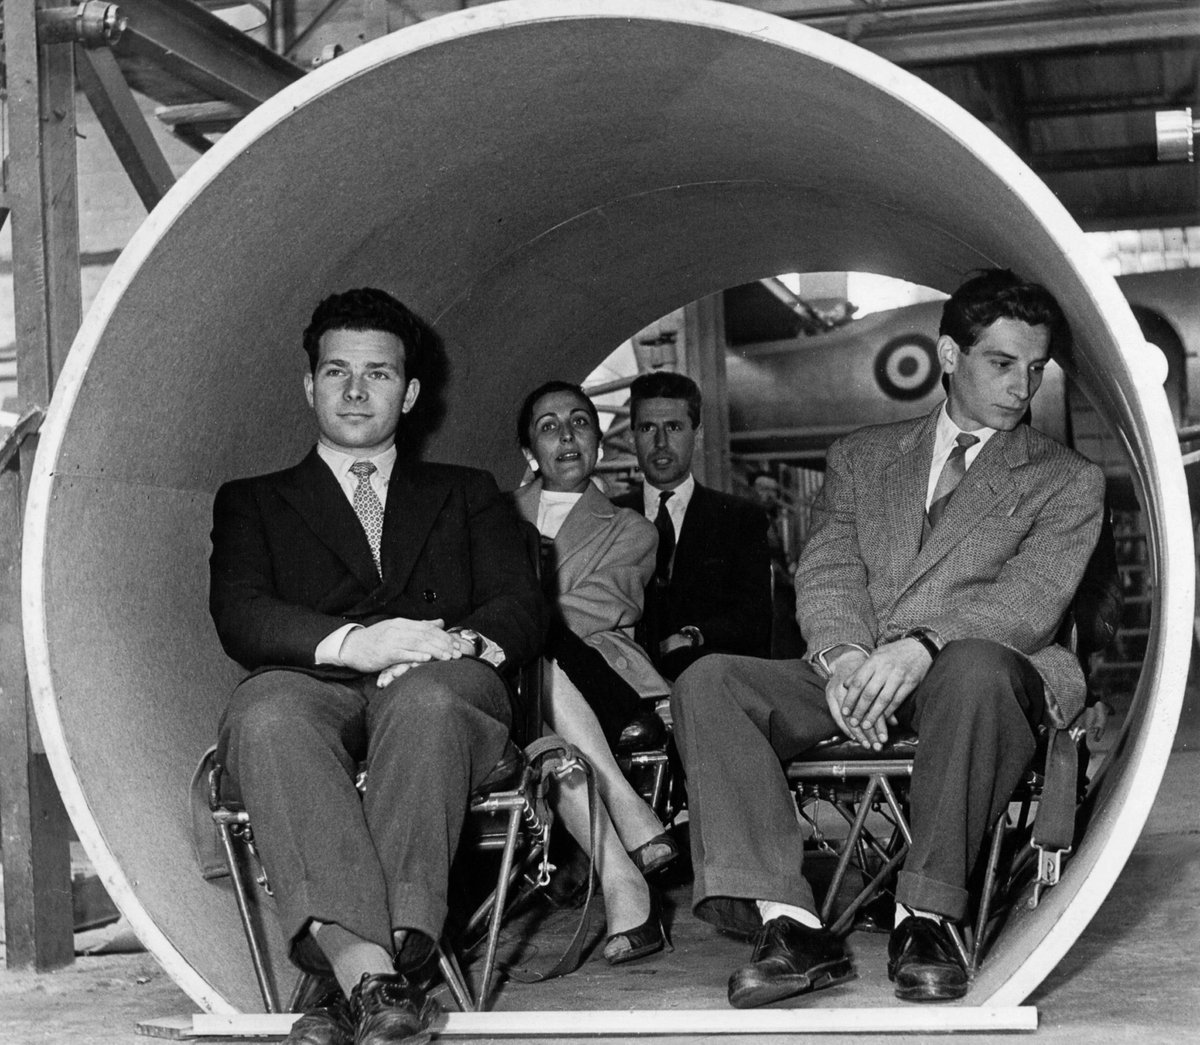 People invited to test the dimensions of Dassault's 'Méditerranée' business jet project on board a model reproducing the space of its fuselage. This took place in 1958, shortly after which the project changed face and became the Falcon 20. © Dassault Aviation